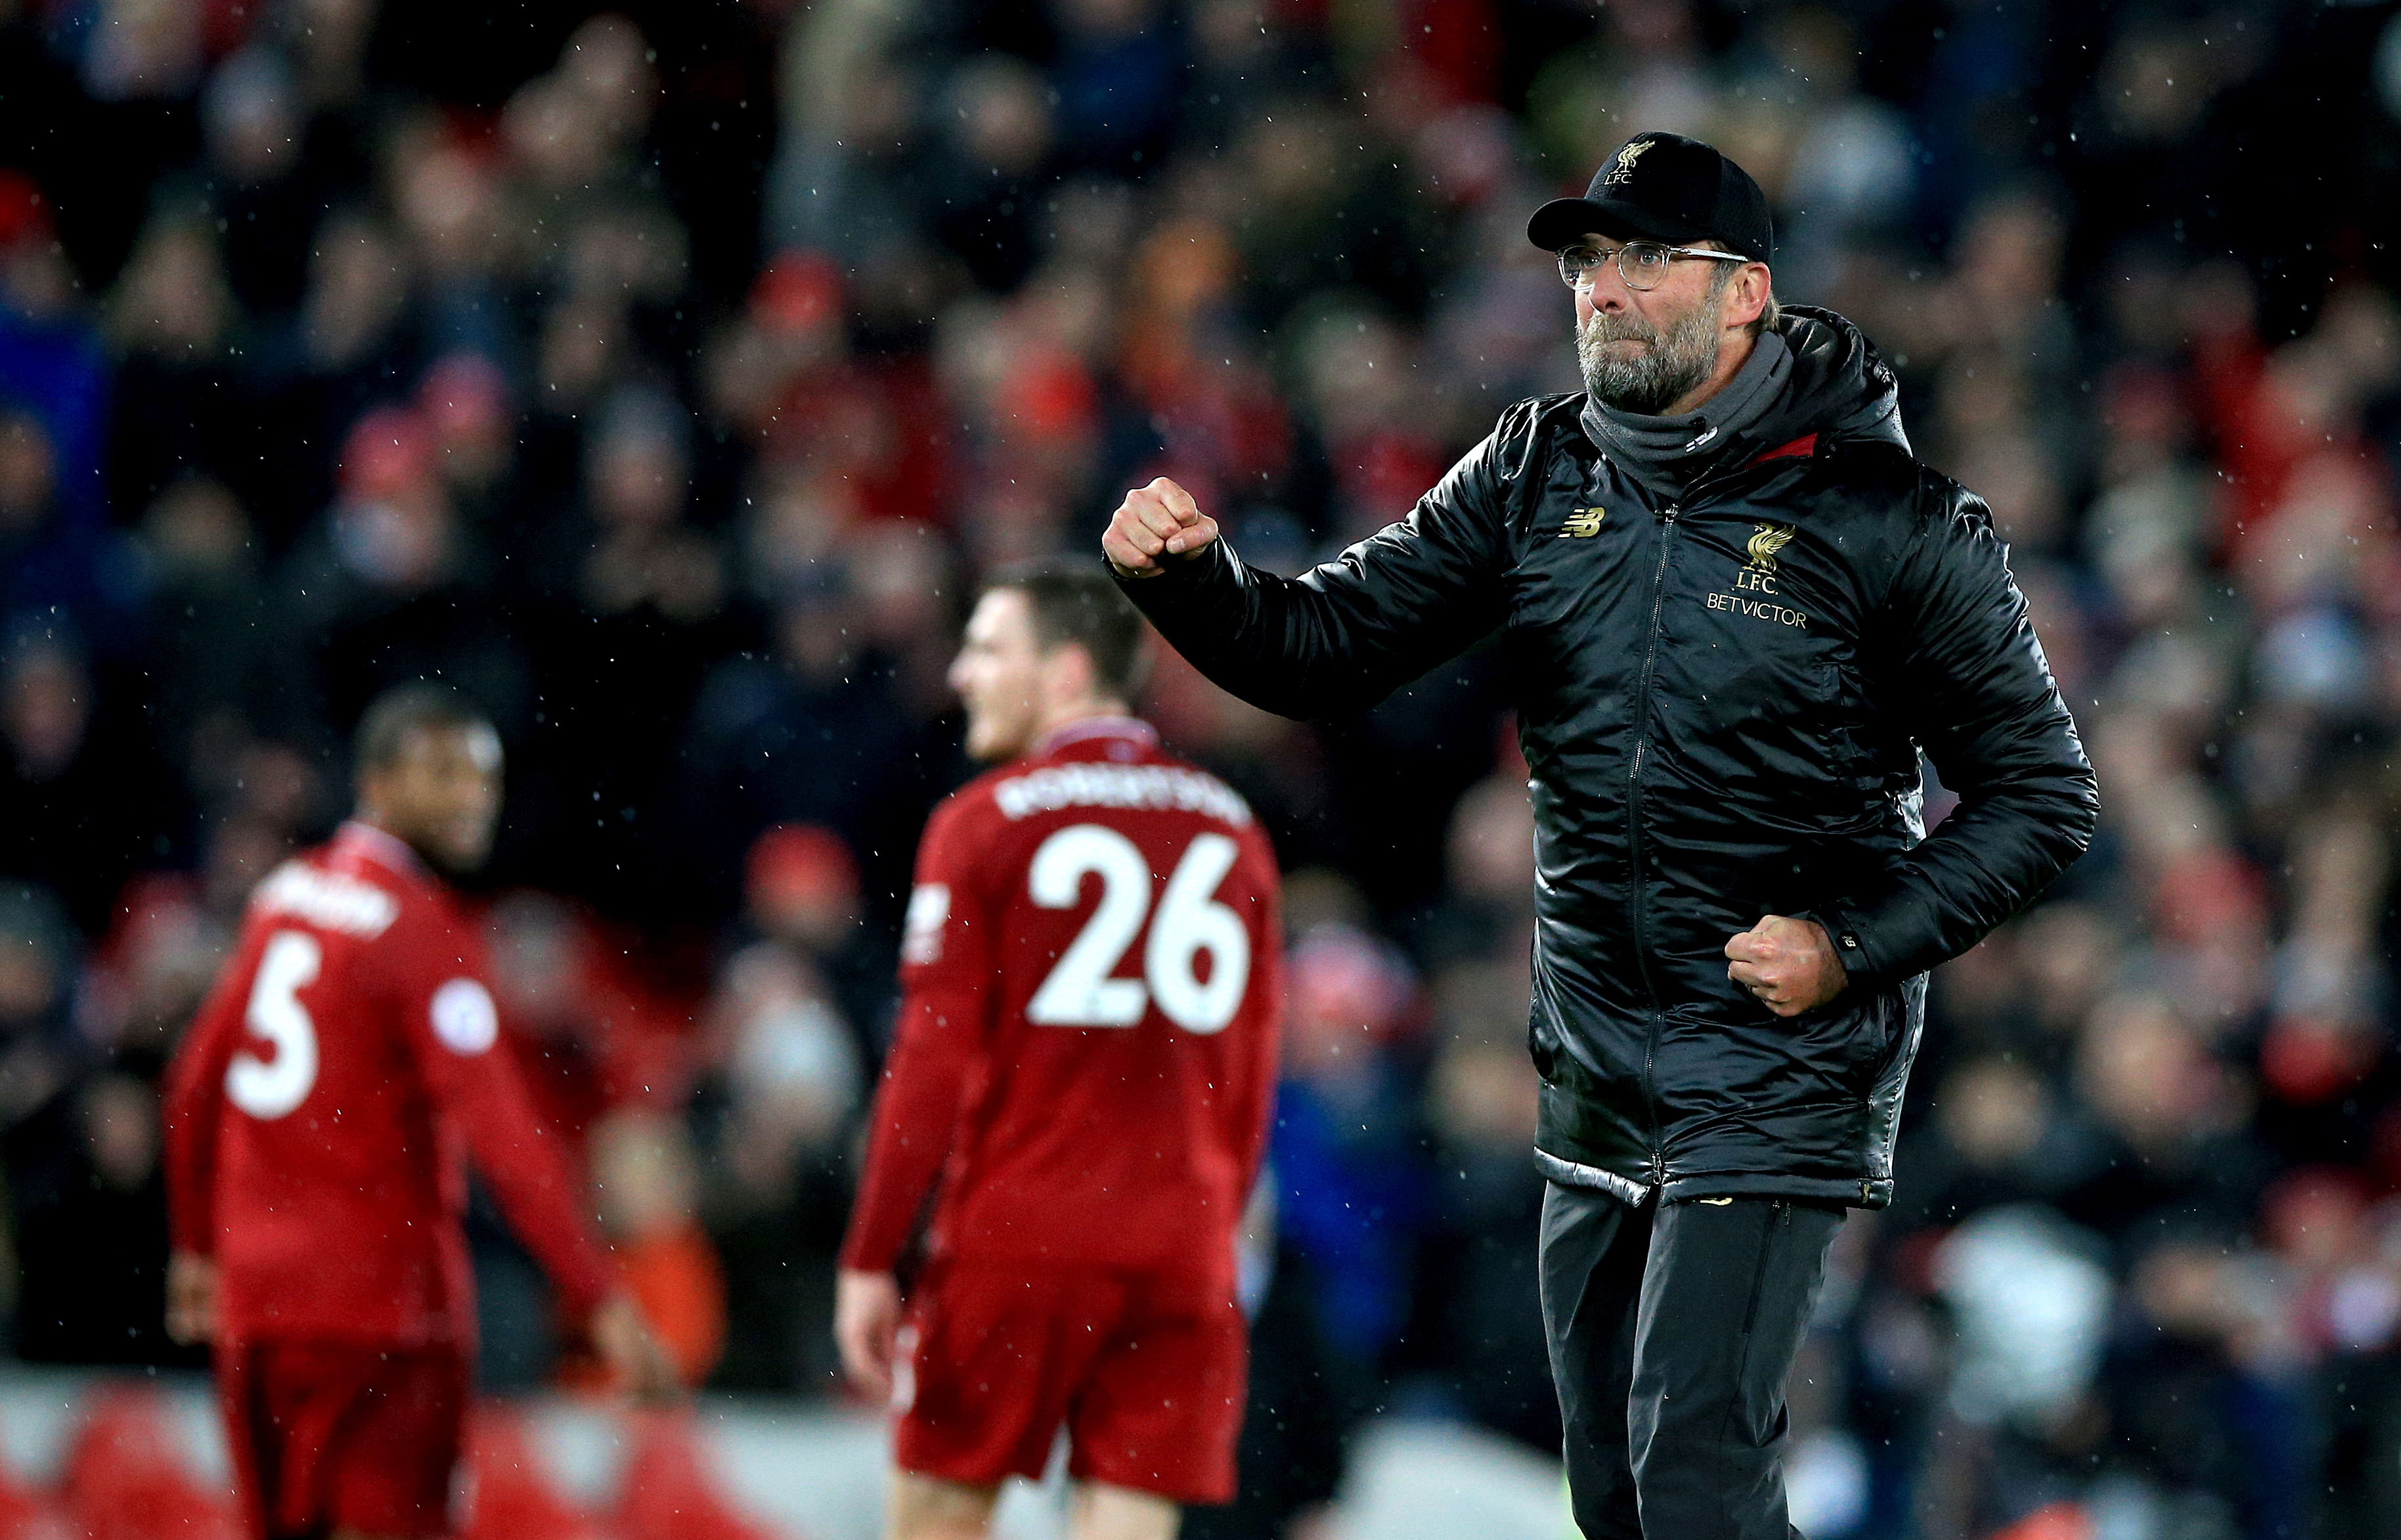 Jurgen Klopp celebrates with the crowd at Anfield